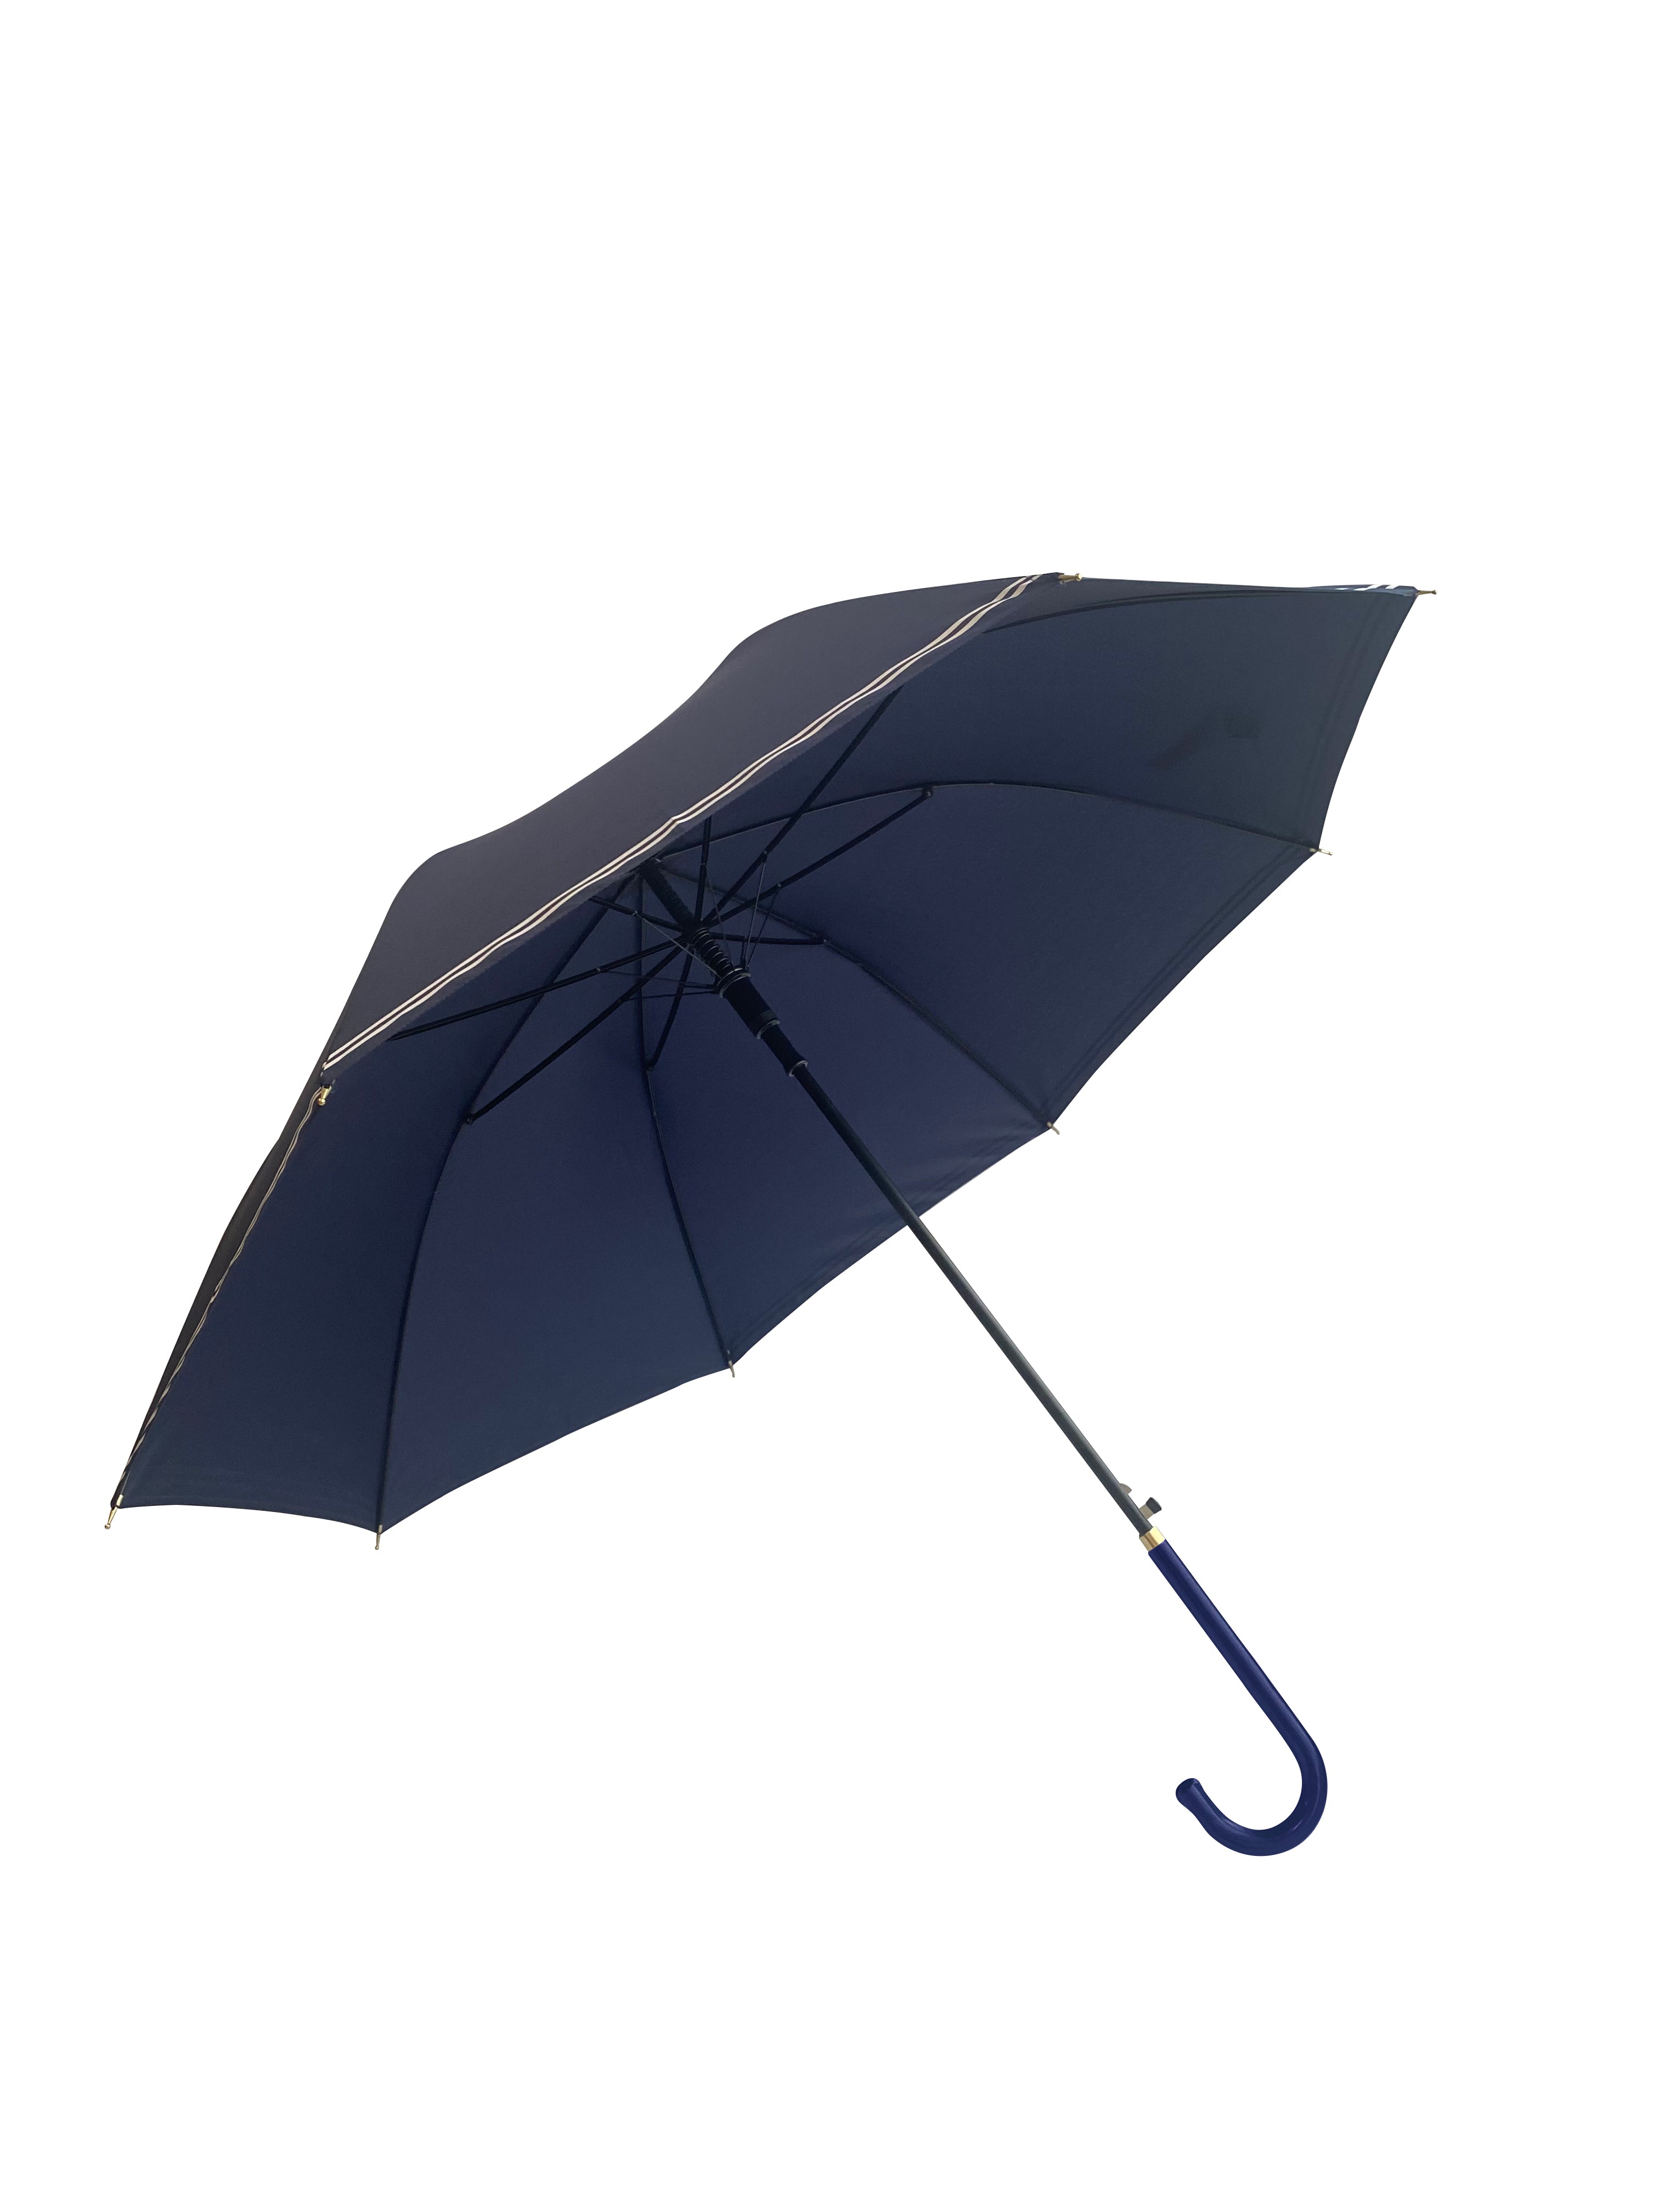 MINISO LADY'S STRIPED LONG-HANDLED UMBRELLA 2015021810109 LIFE DEPARTMENT